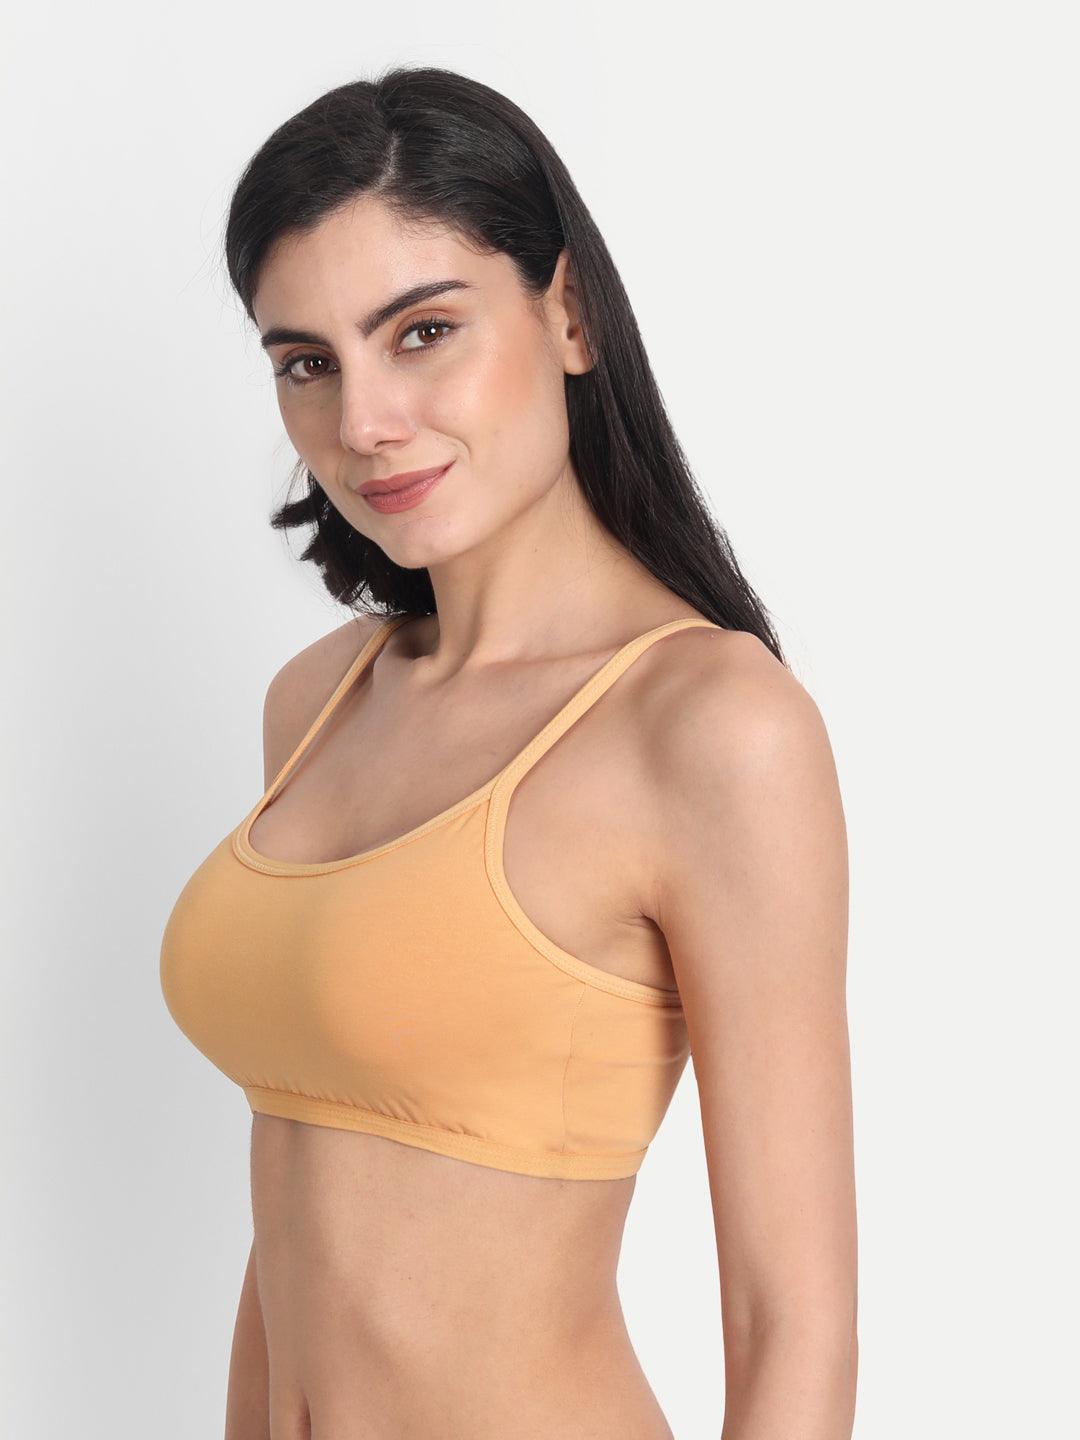 Sports Bra for Girls and Women |Full Coverage | Broad Strap | Non-Padd